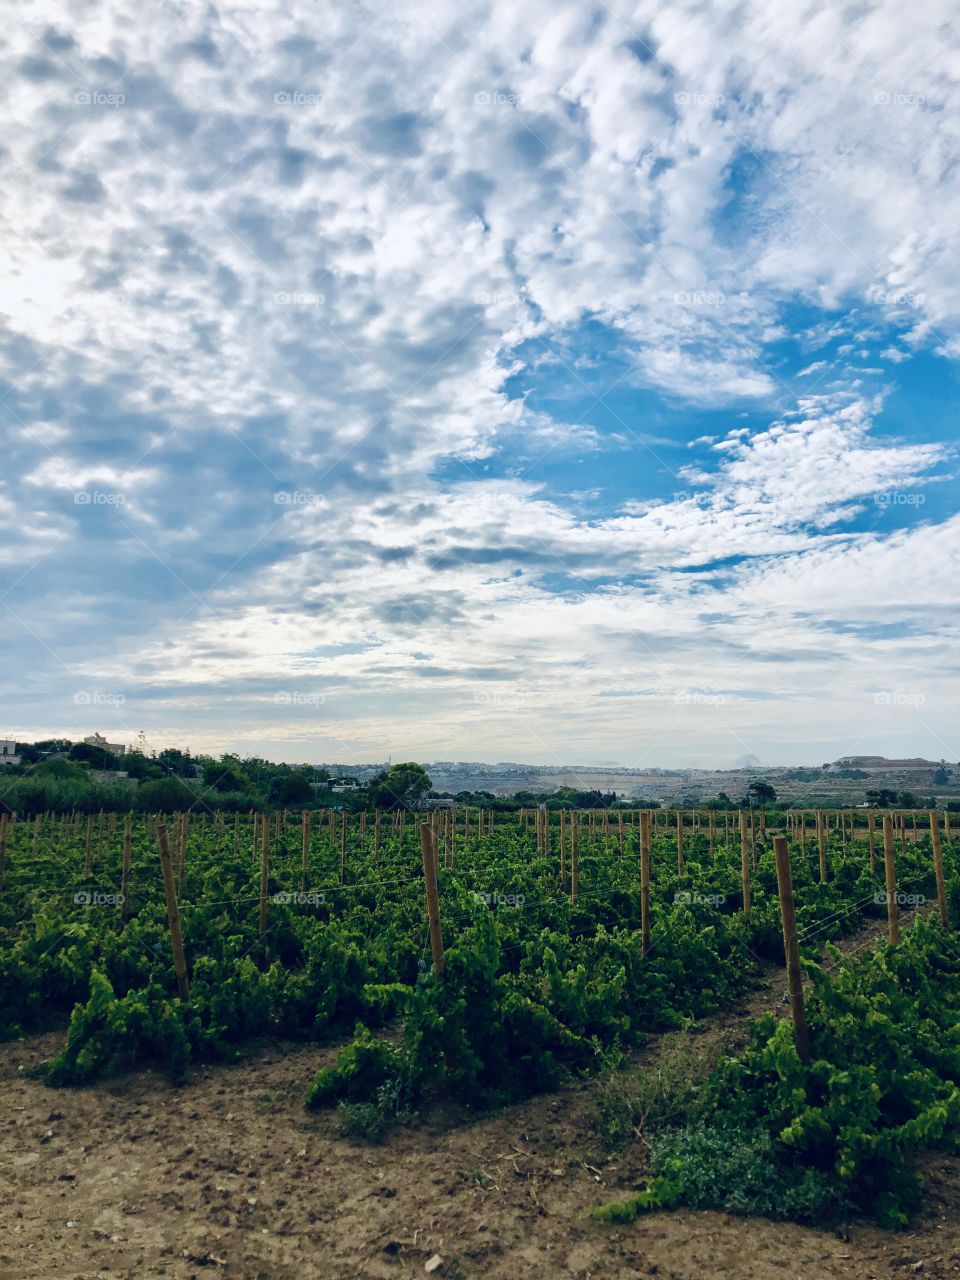 Photo taken this morning, in Burmarrad Malta. Grapevines looking bright green, soon to be wine and the magical blue sky full of white and grey clouds